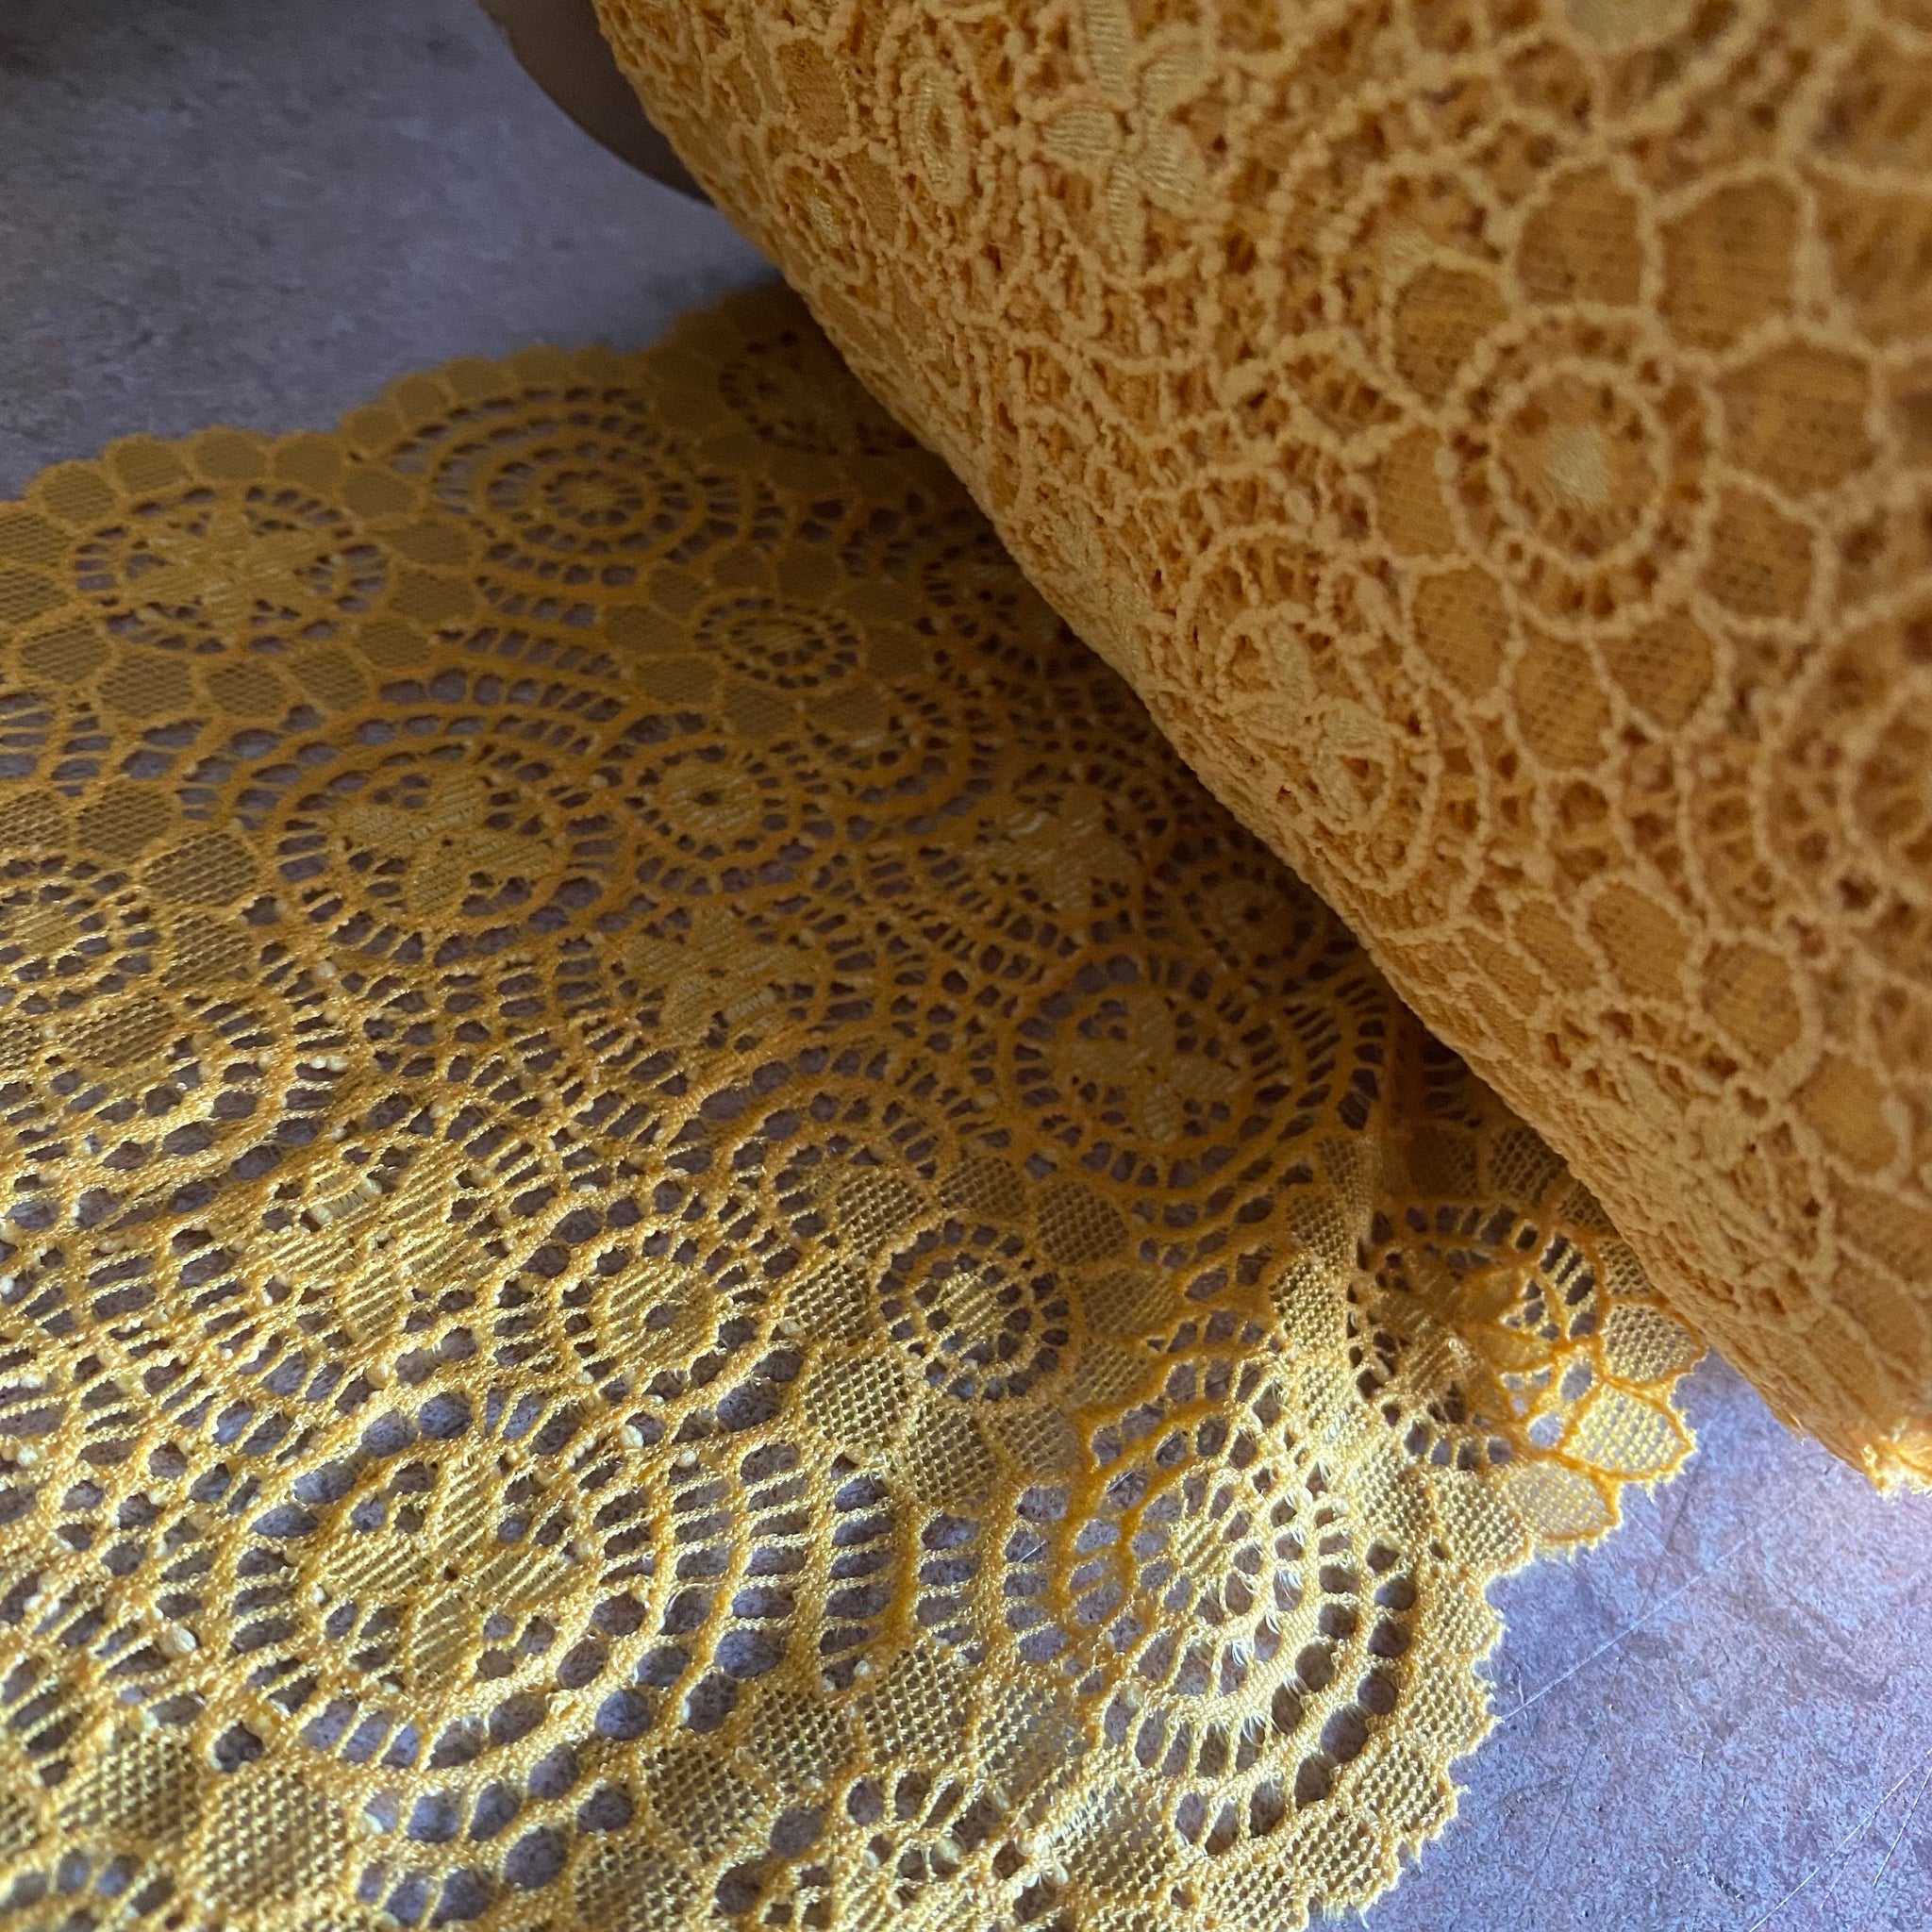 “Old Gold” Chanty Stretch Galloon Lace (16cm Wide) - 1m